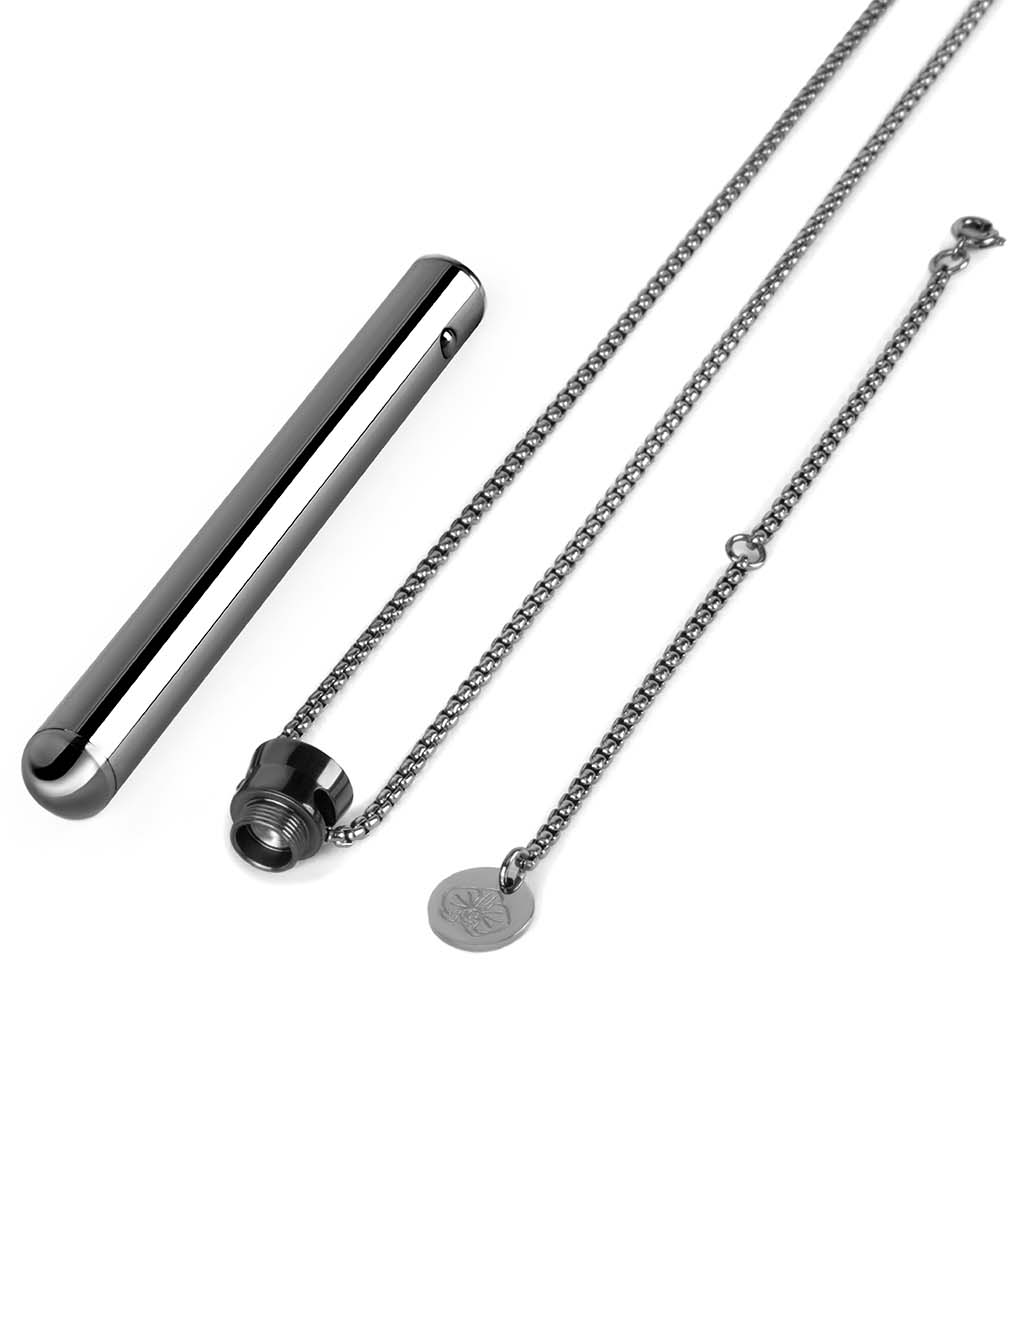 Le Wand Vibrating Necklace- Chain